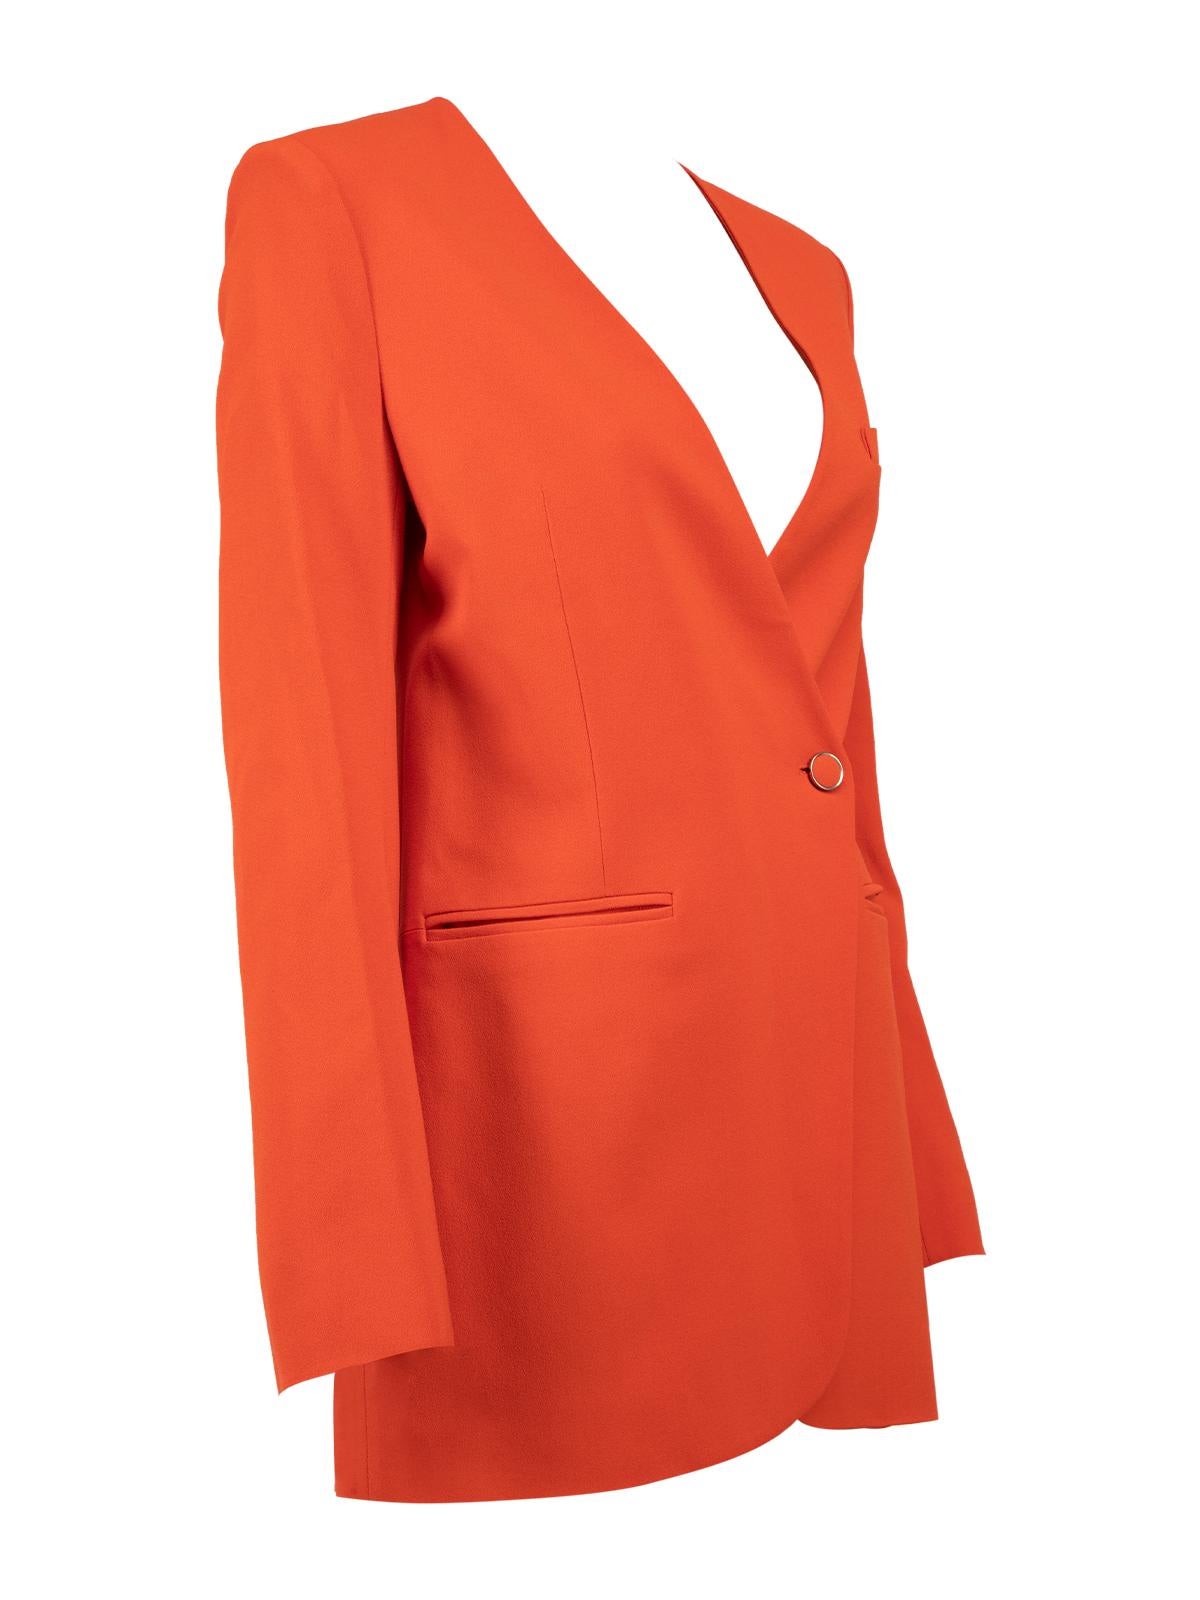 CONDITION is Very good. Hardly any visible wear to blazer is evident on this used Matthew Williamson designer resale item. Details Orange Synthetic Blazer Long sleeves Shoulder padded Double breasted 3 x Front pockets Single vent on back Fully lined